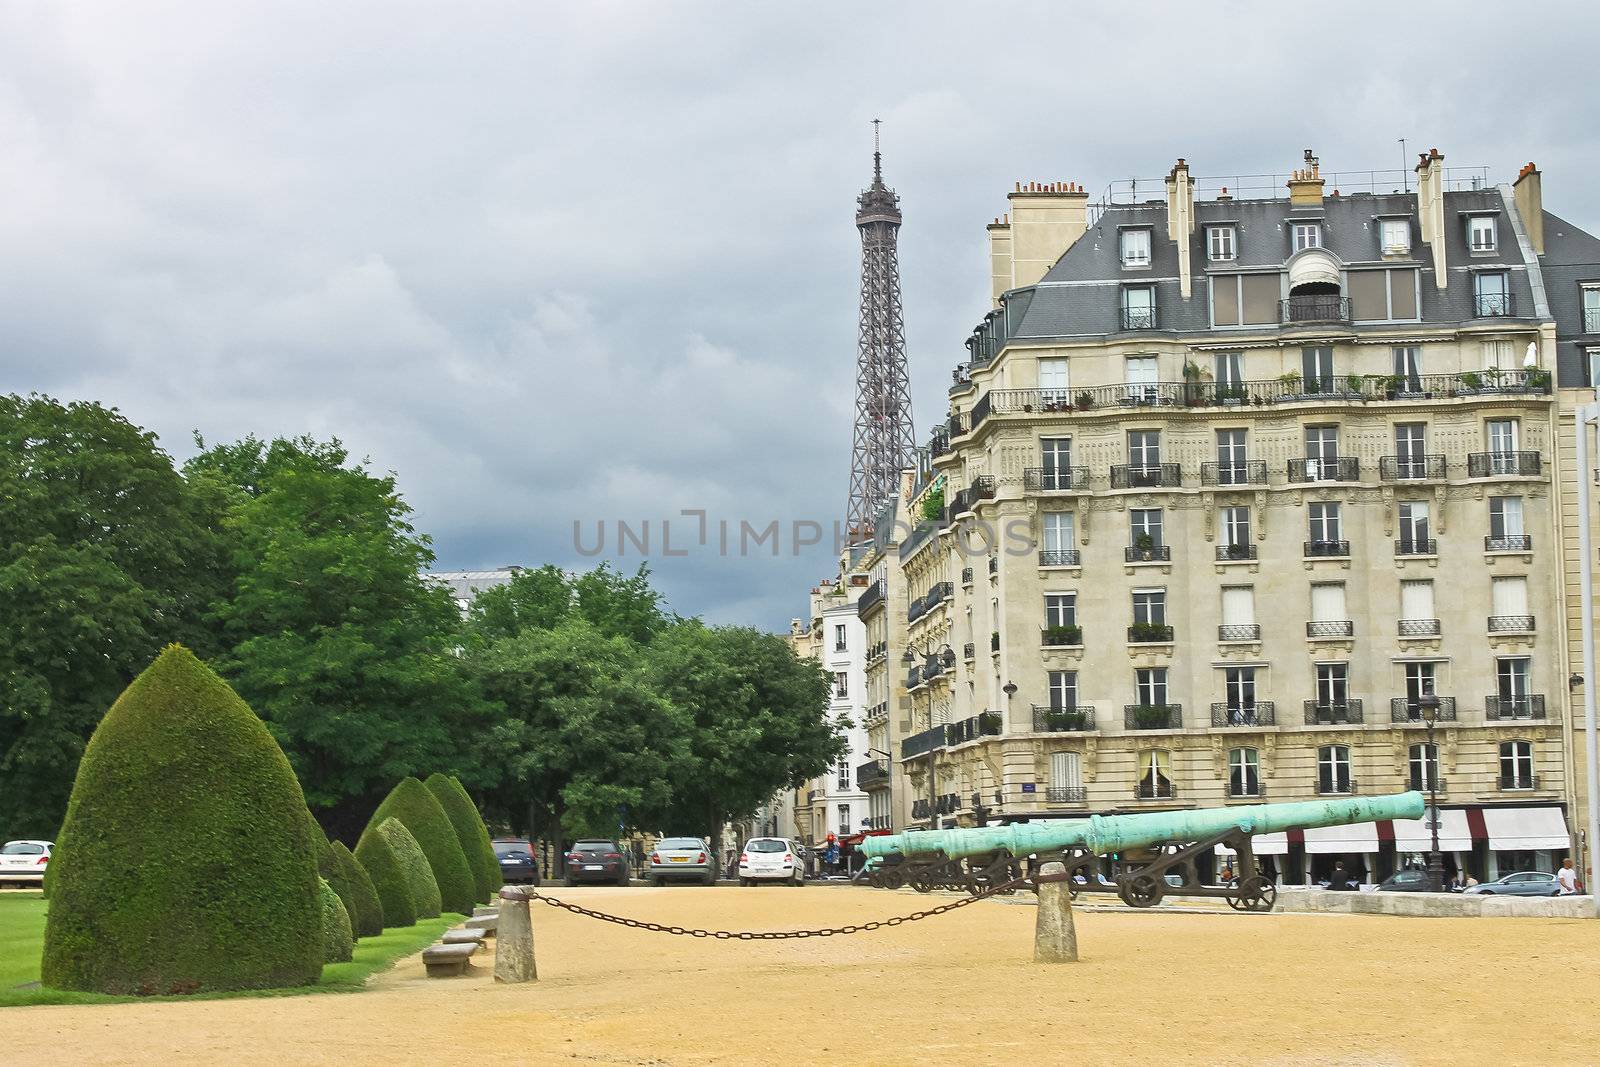 A view of the Eiffel Tower from Les Invalides in Paris